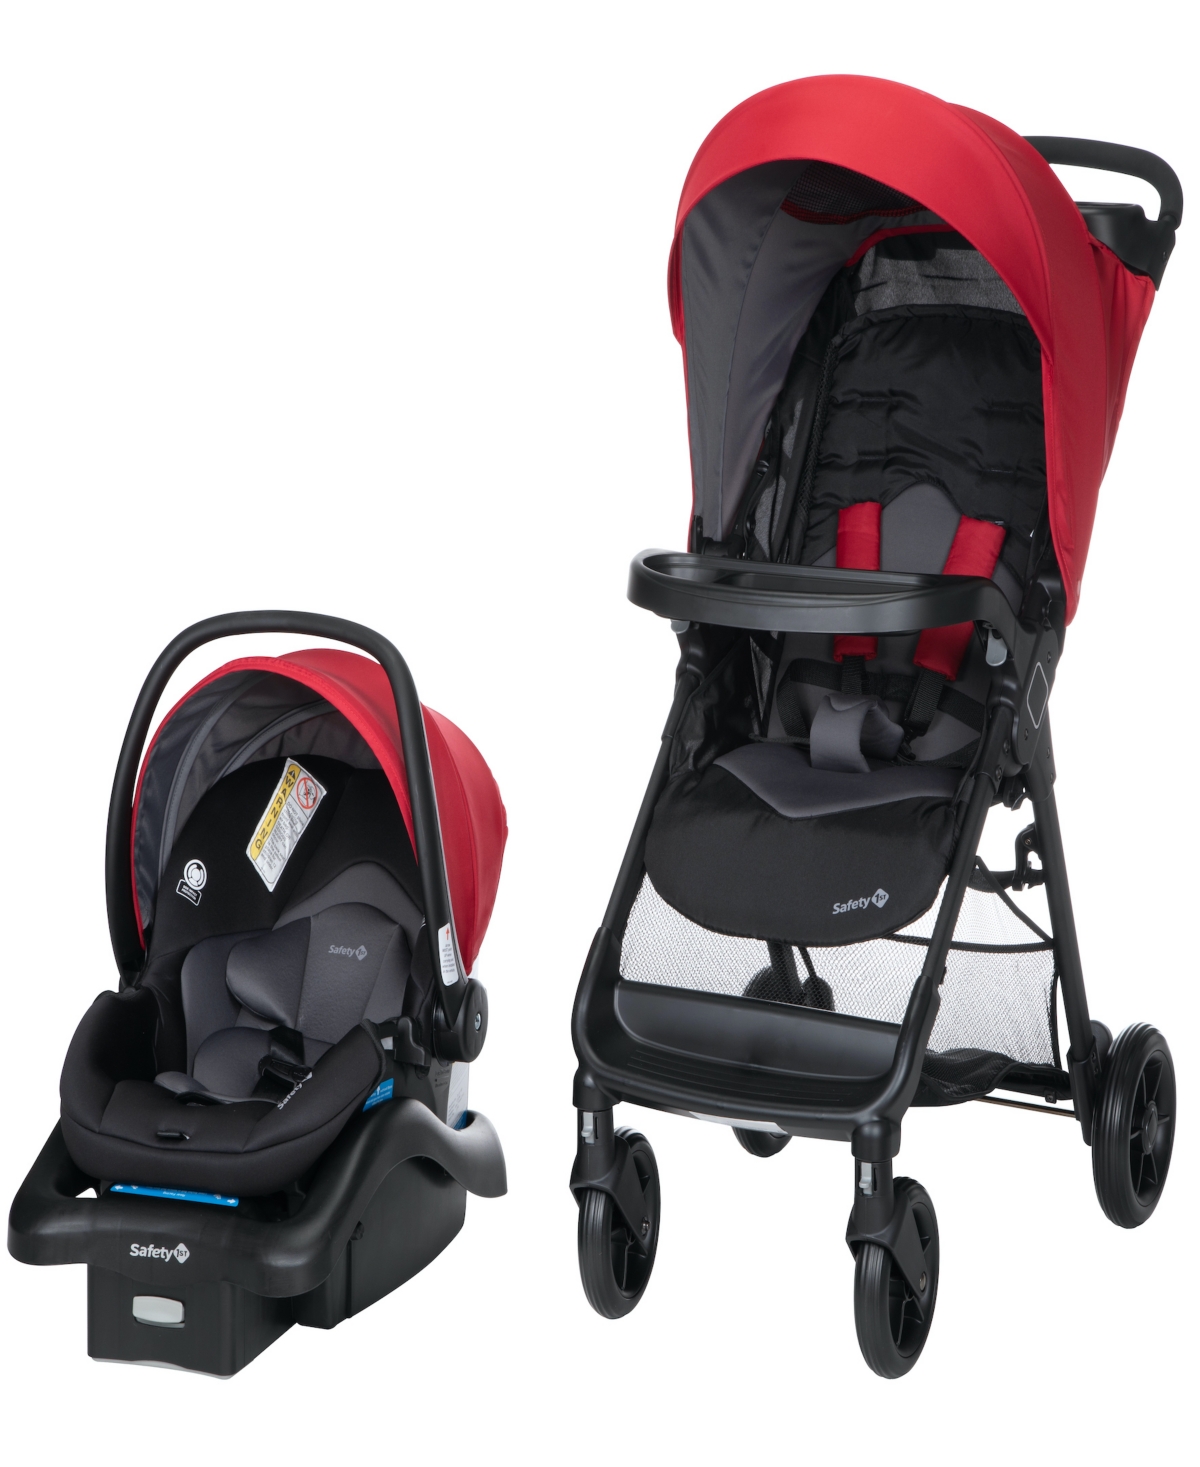 Safety 1st Baby Smooth Ride Travel System In Black Cherry